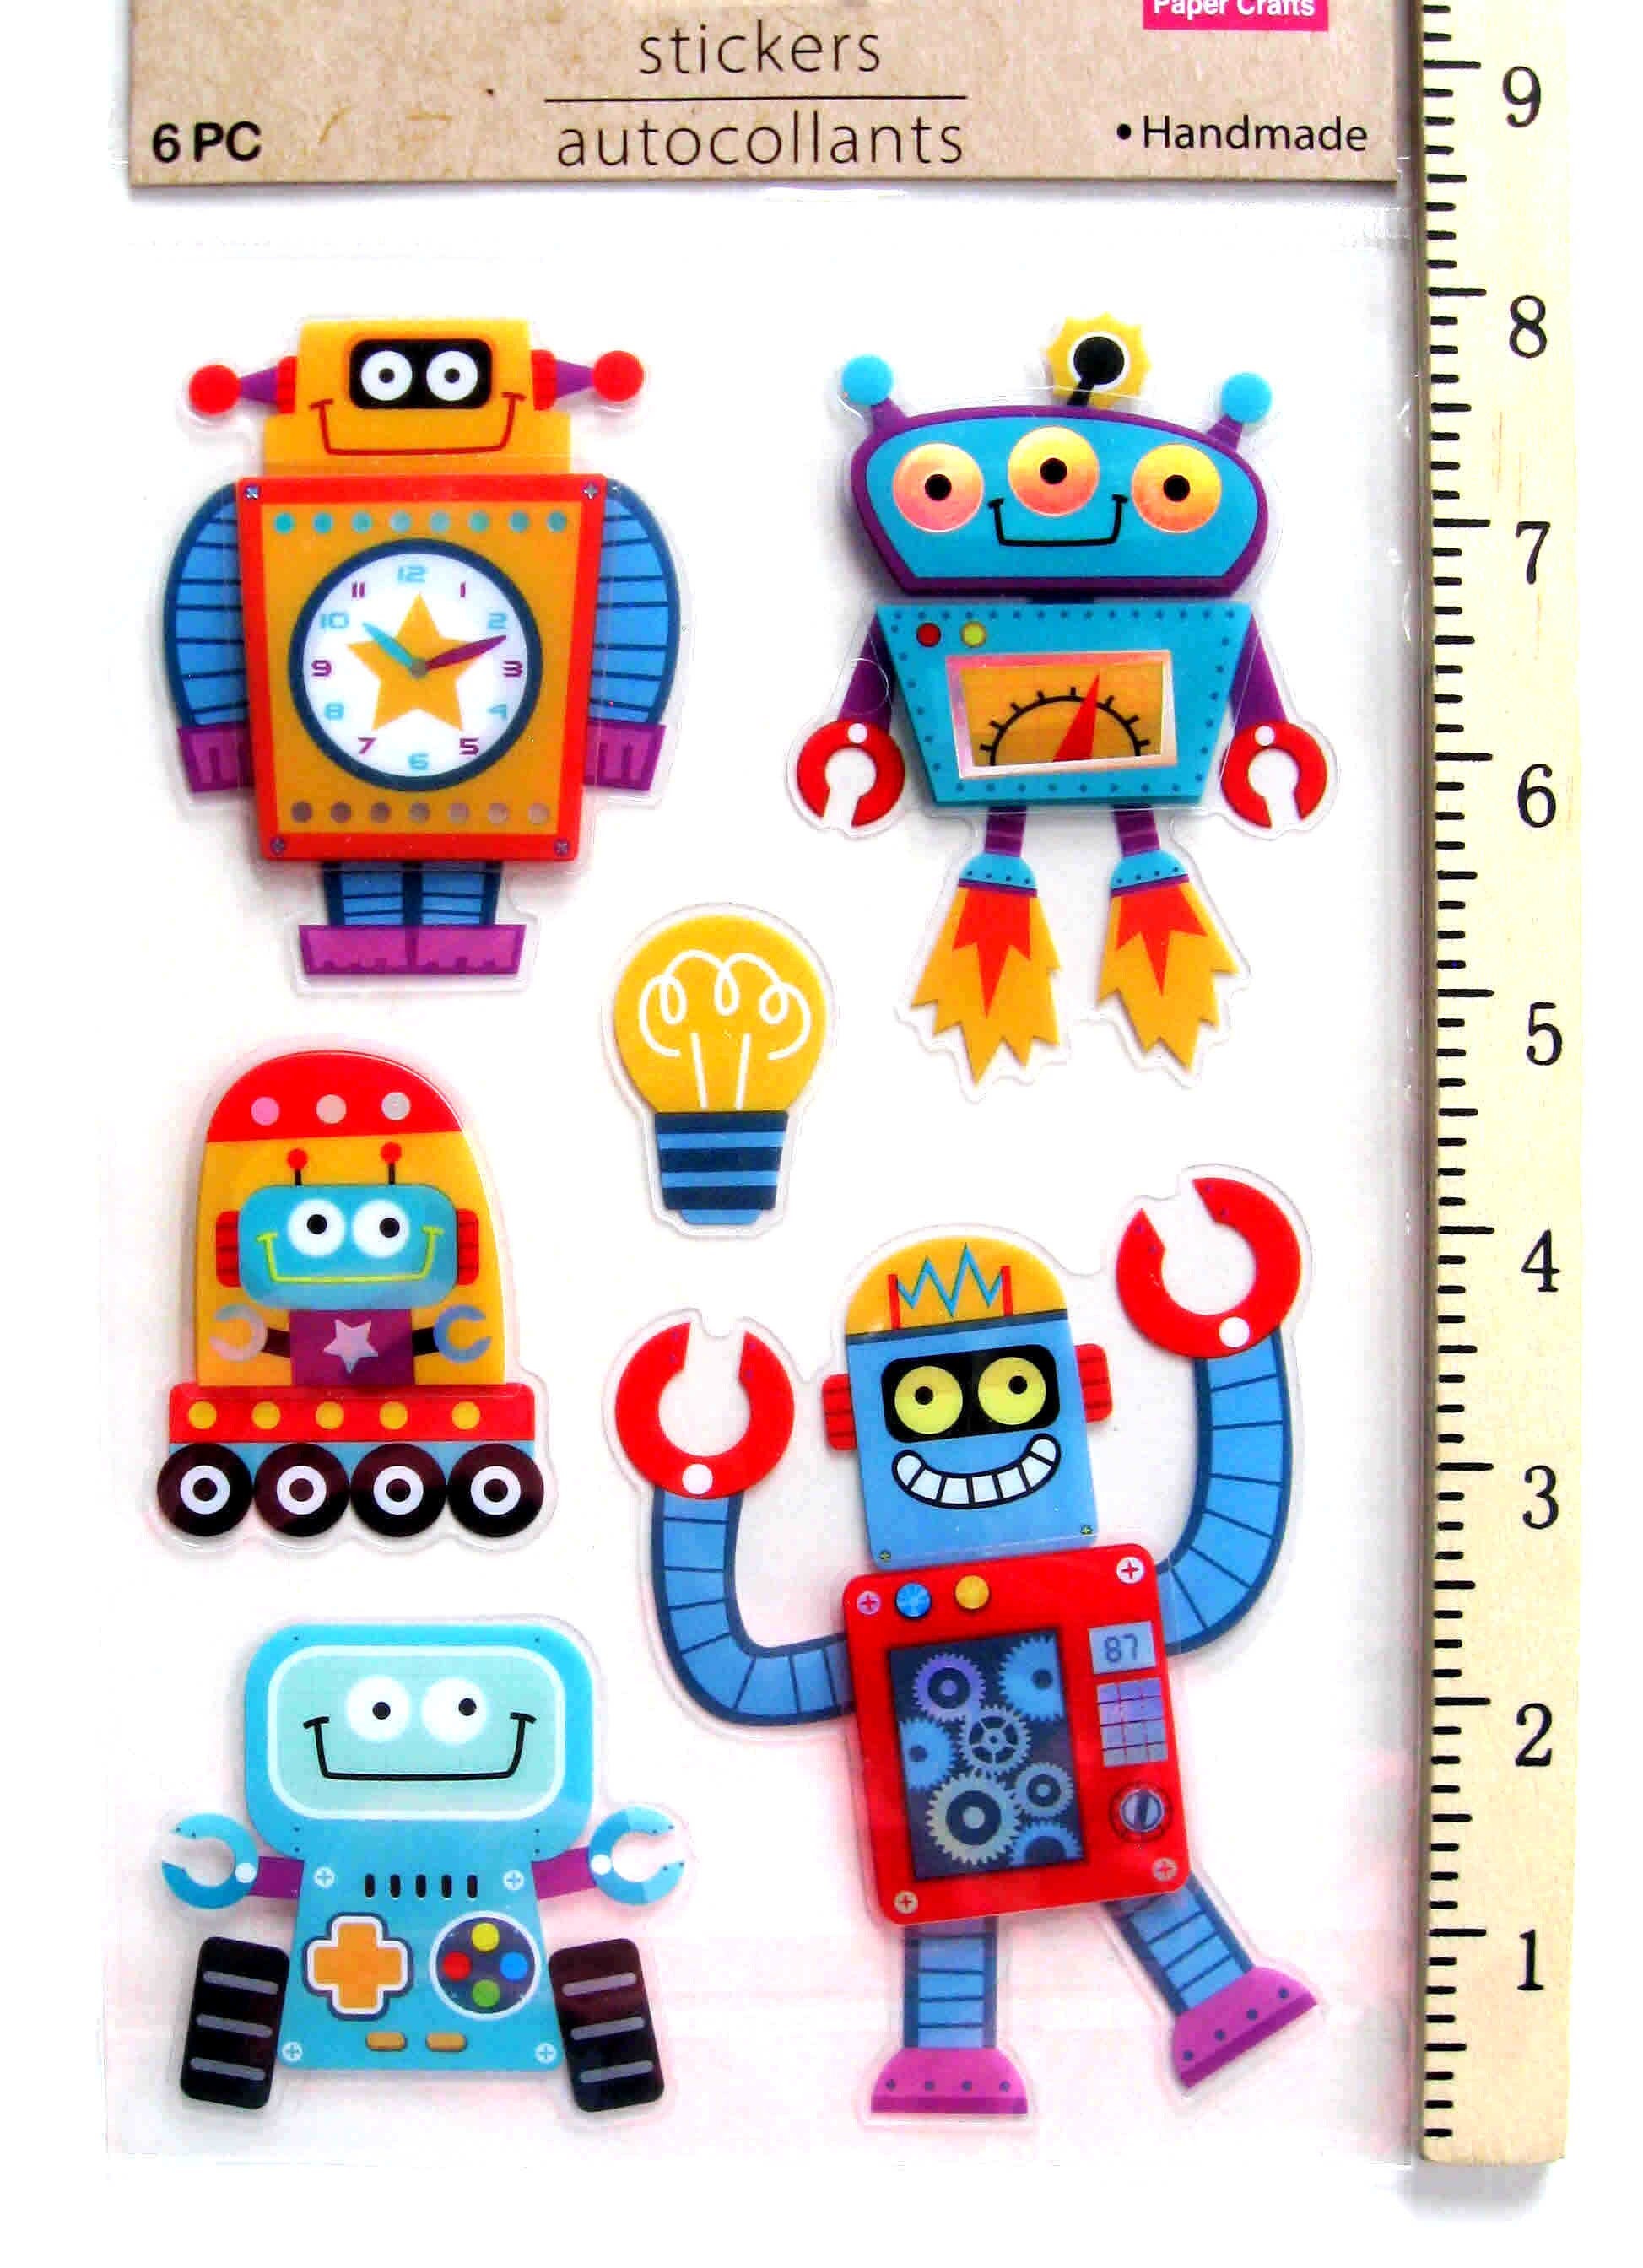 18,221 Robot Stickers Images, Stock Photos, 3D objects, & Vectors